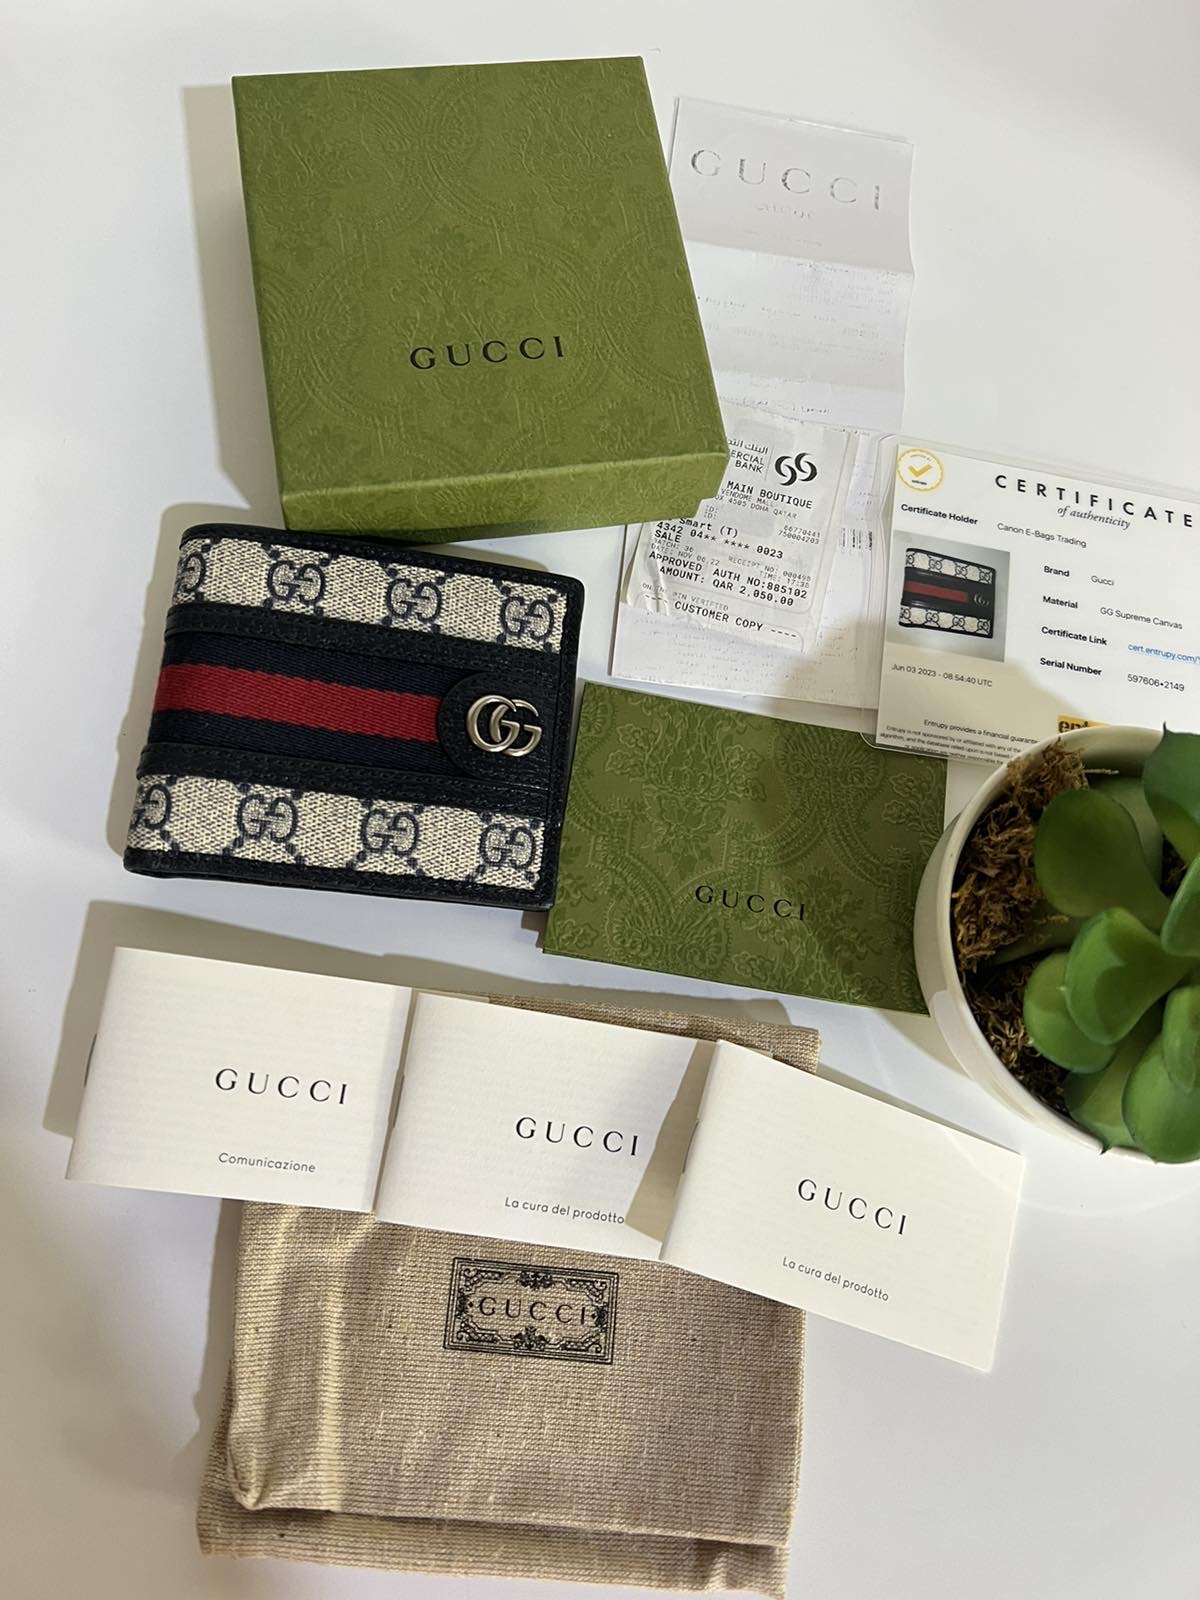 Authentic Gucci and Prada authenticity card, care card, receipt